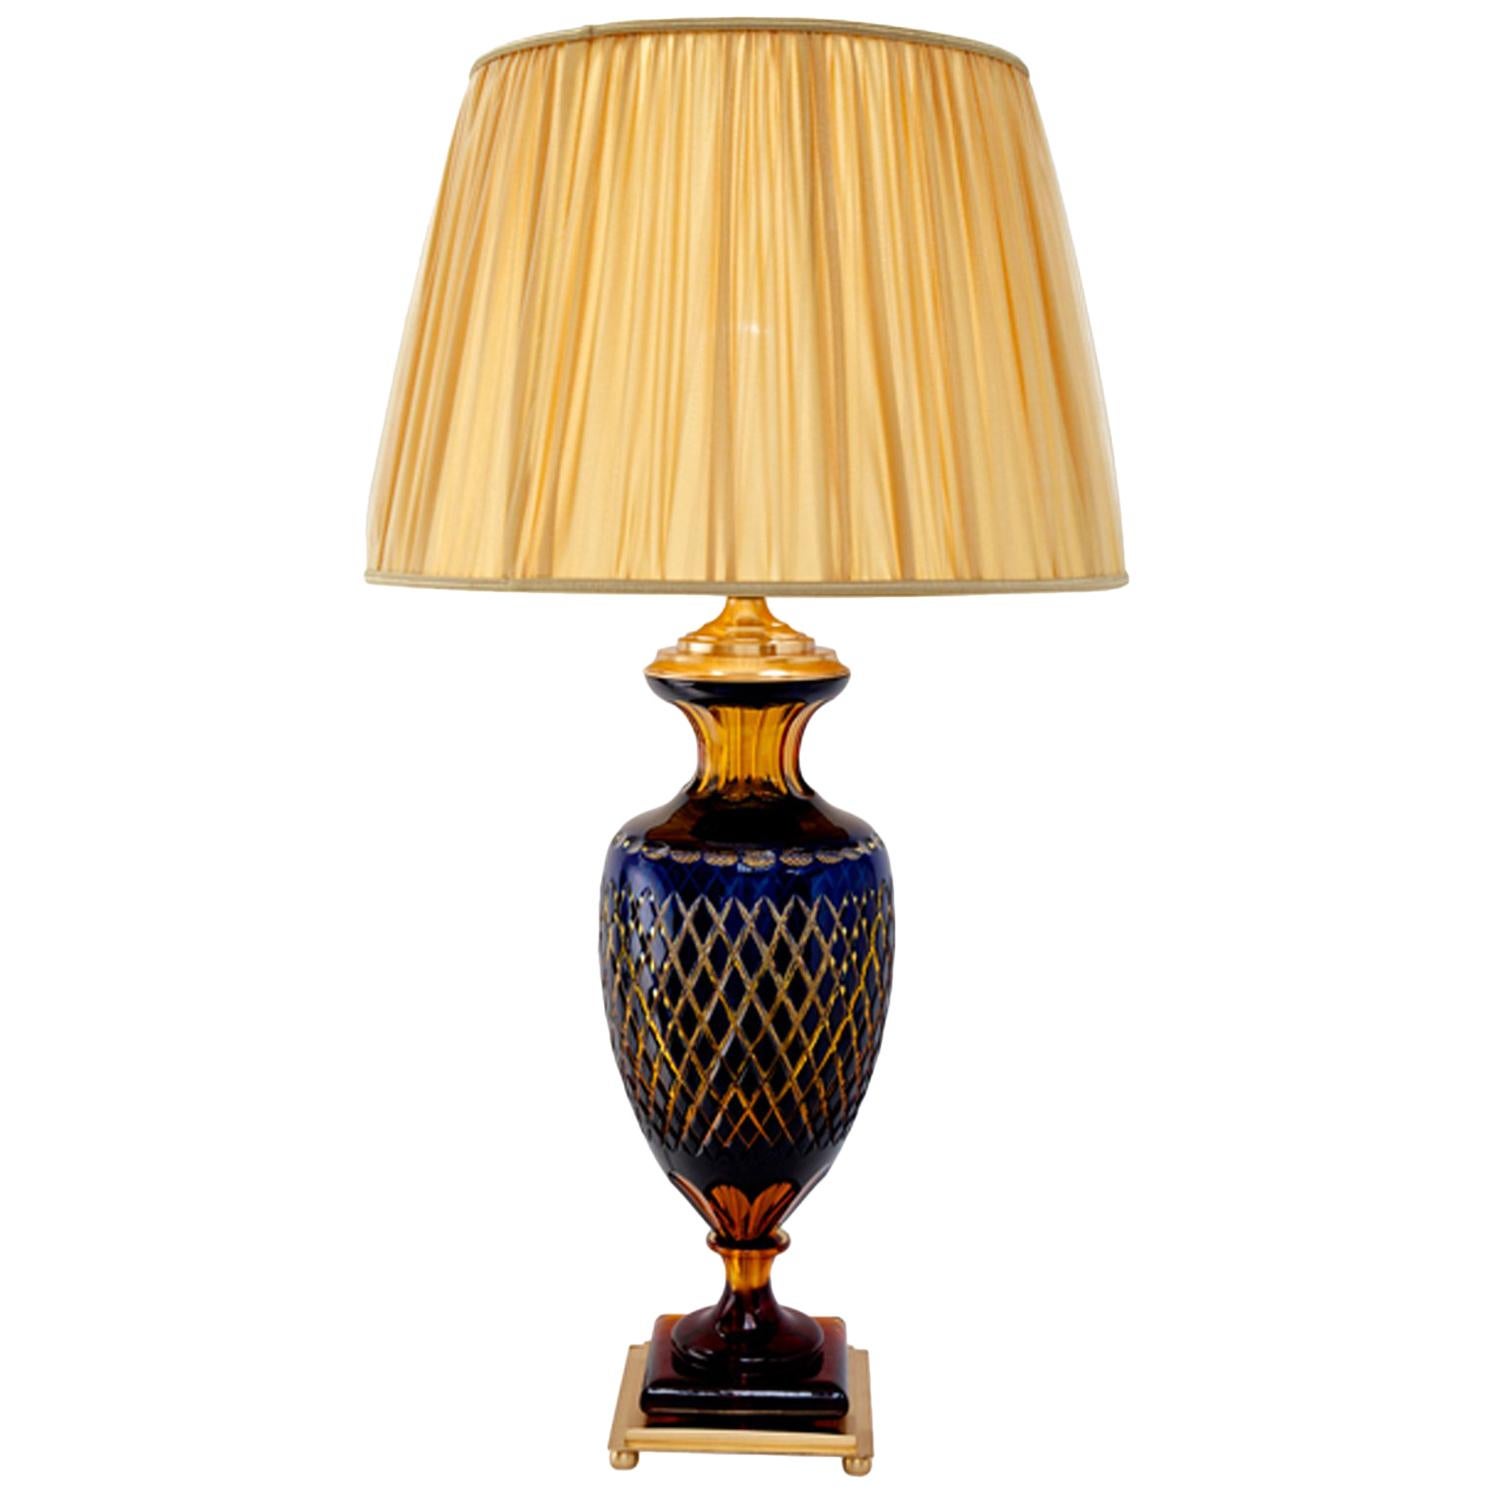 Ugo Poggi Firenze Handcrafted Crystal Table Lamp Arcetri, with French Gold Trim For Sale